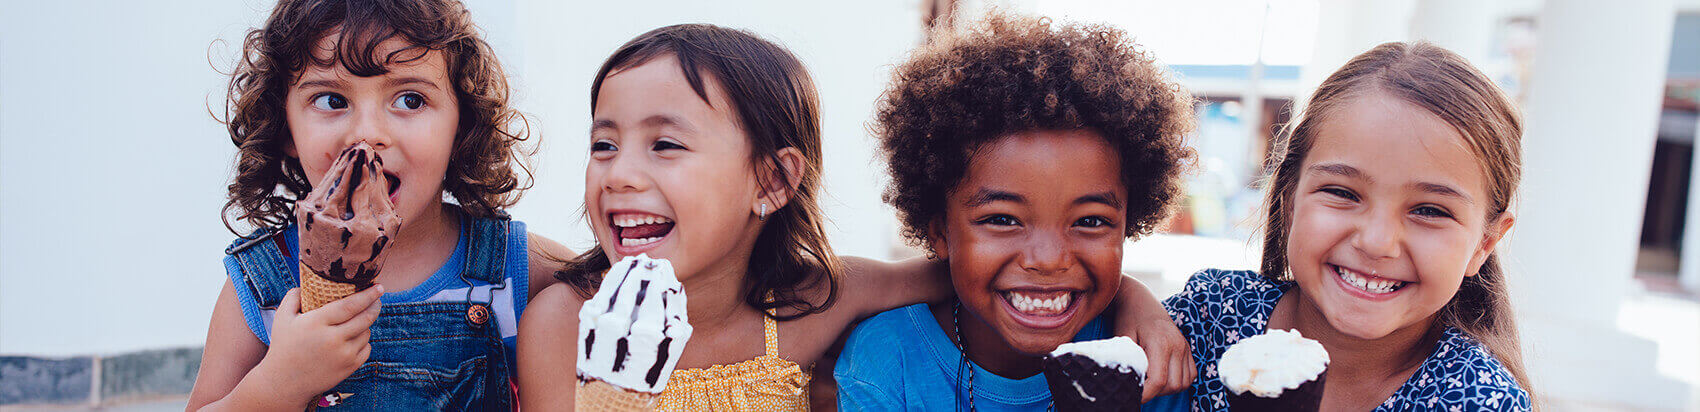 group of children eating ice cream together